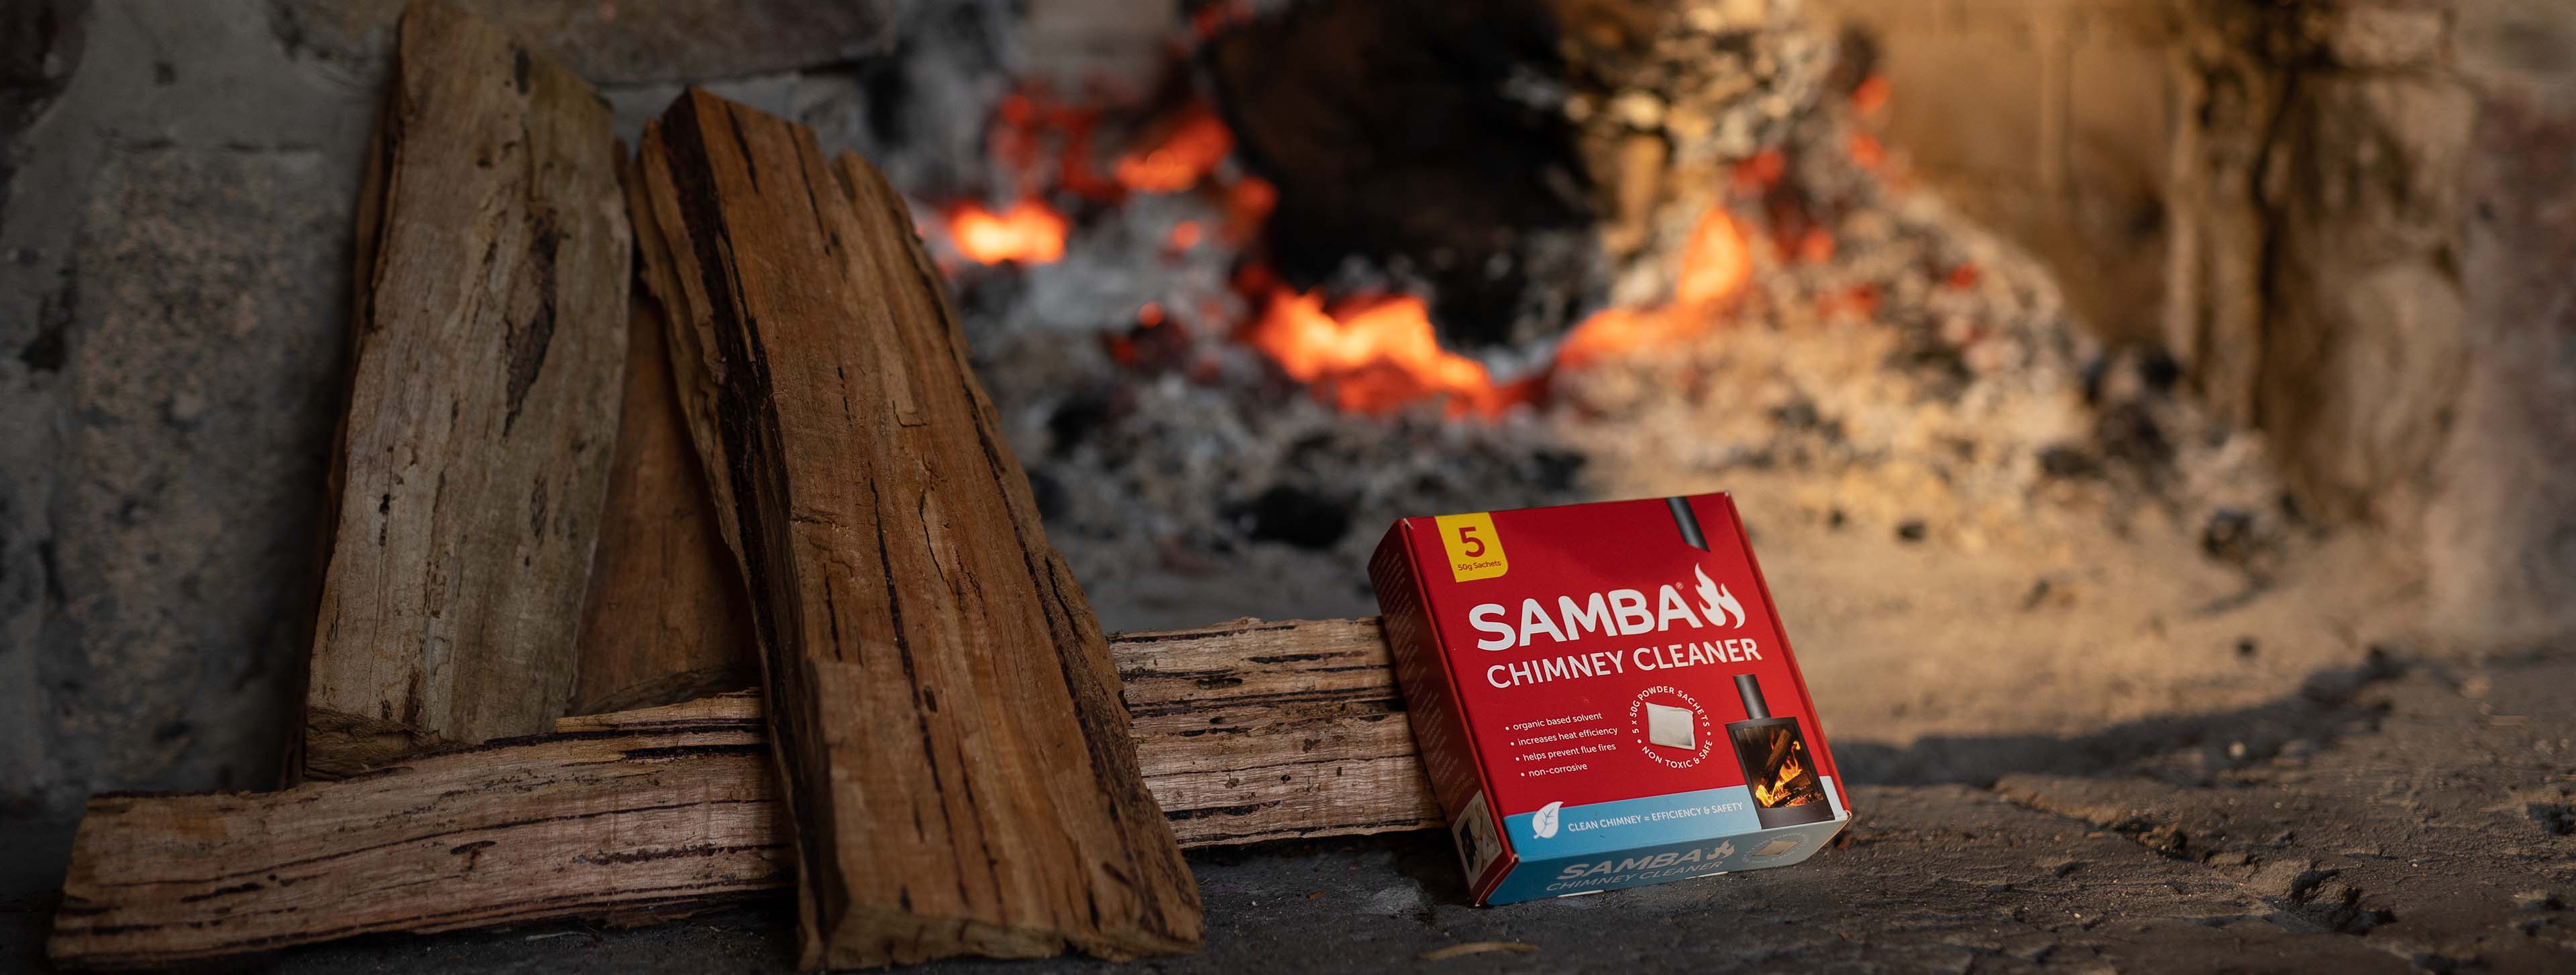 Samba has the Midas touch for chimney cleanliness with Chimney Cleaning Sachets